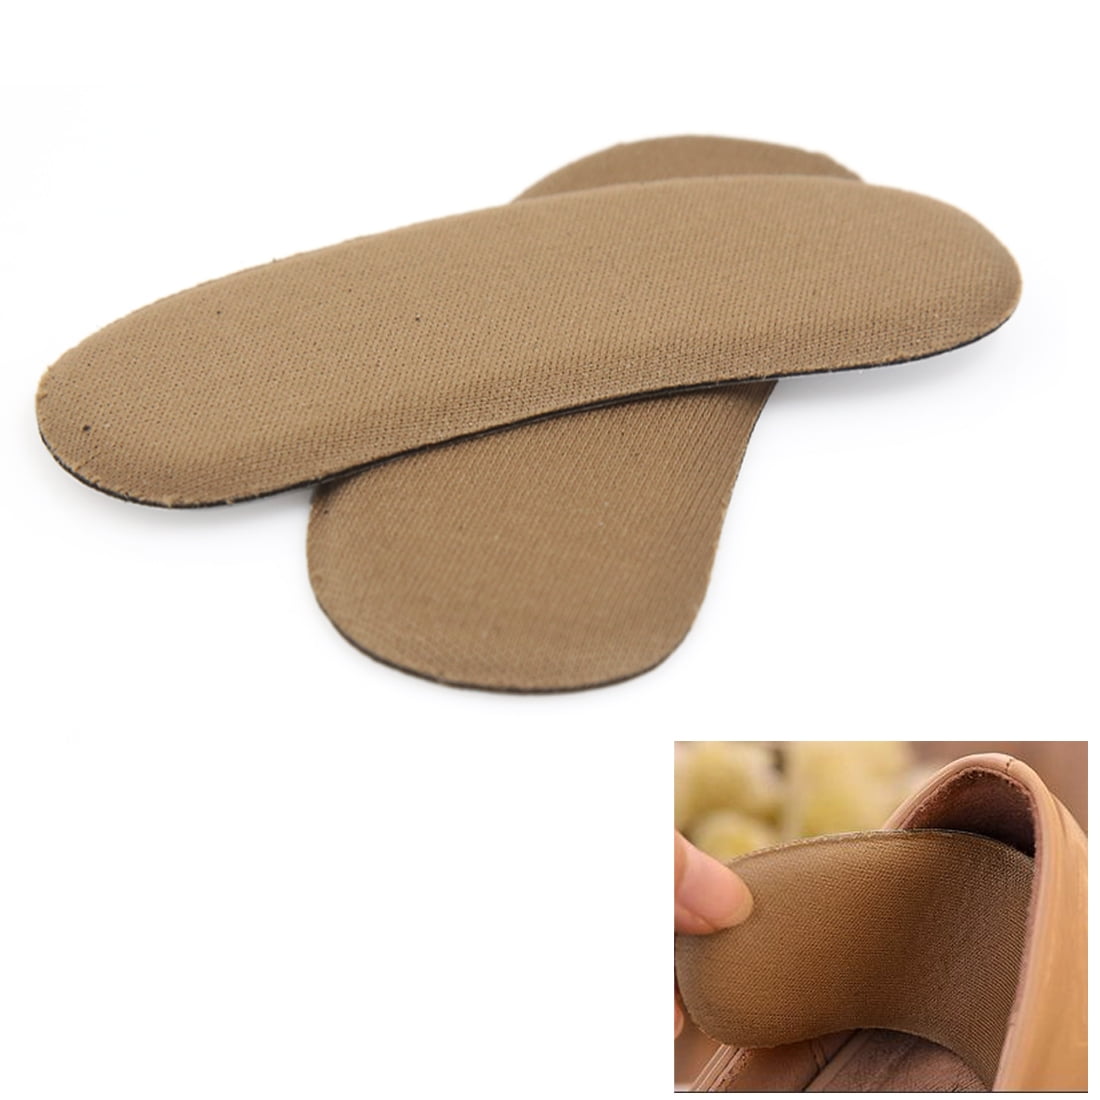 ular Sticky Fabric Shoe Heel Inserts Insoles Pads Cushion Grip Protector BHYN